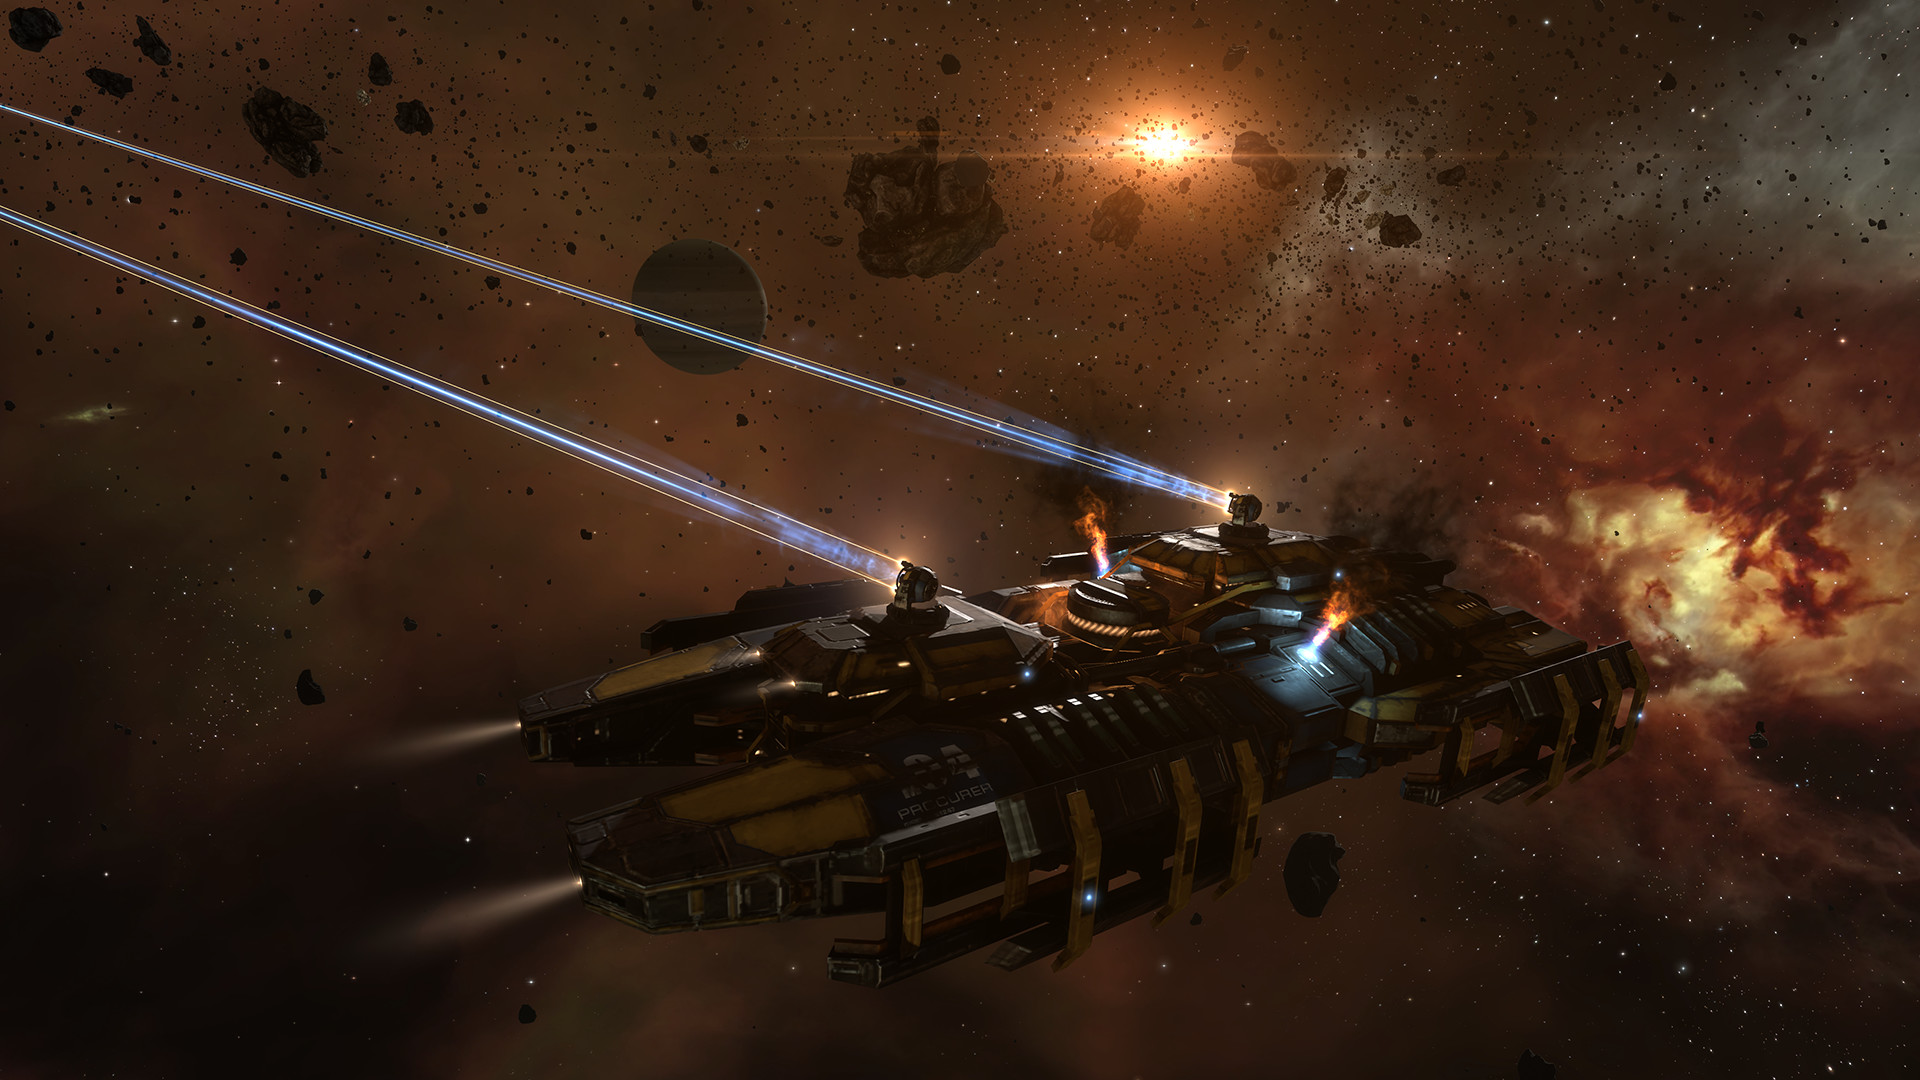 Eve Online could “live forever” as studio prepares to make epic space sim’s tech and engine Open Source